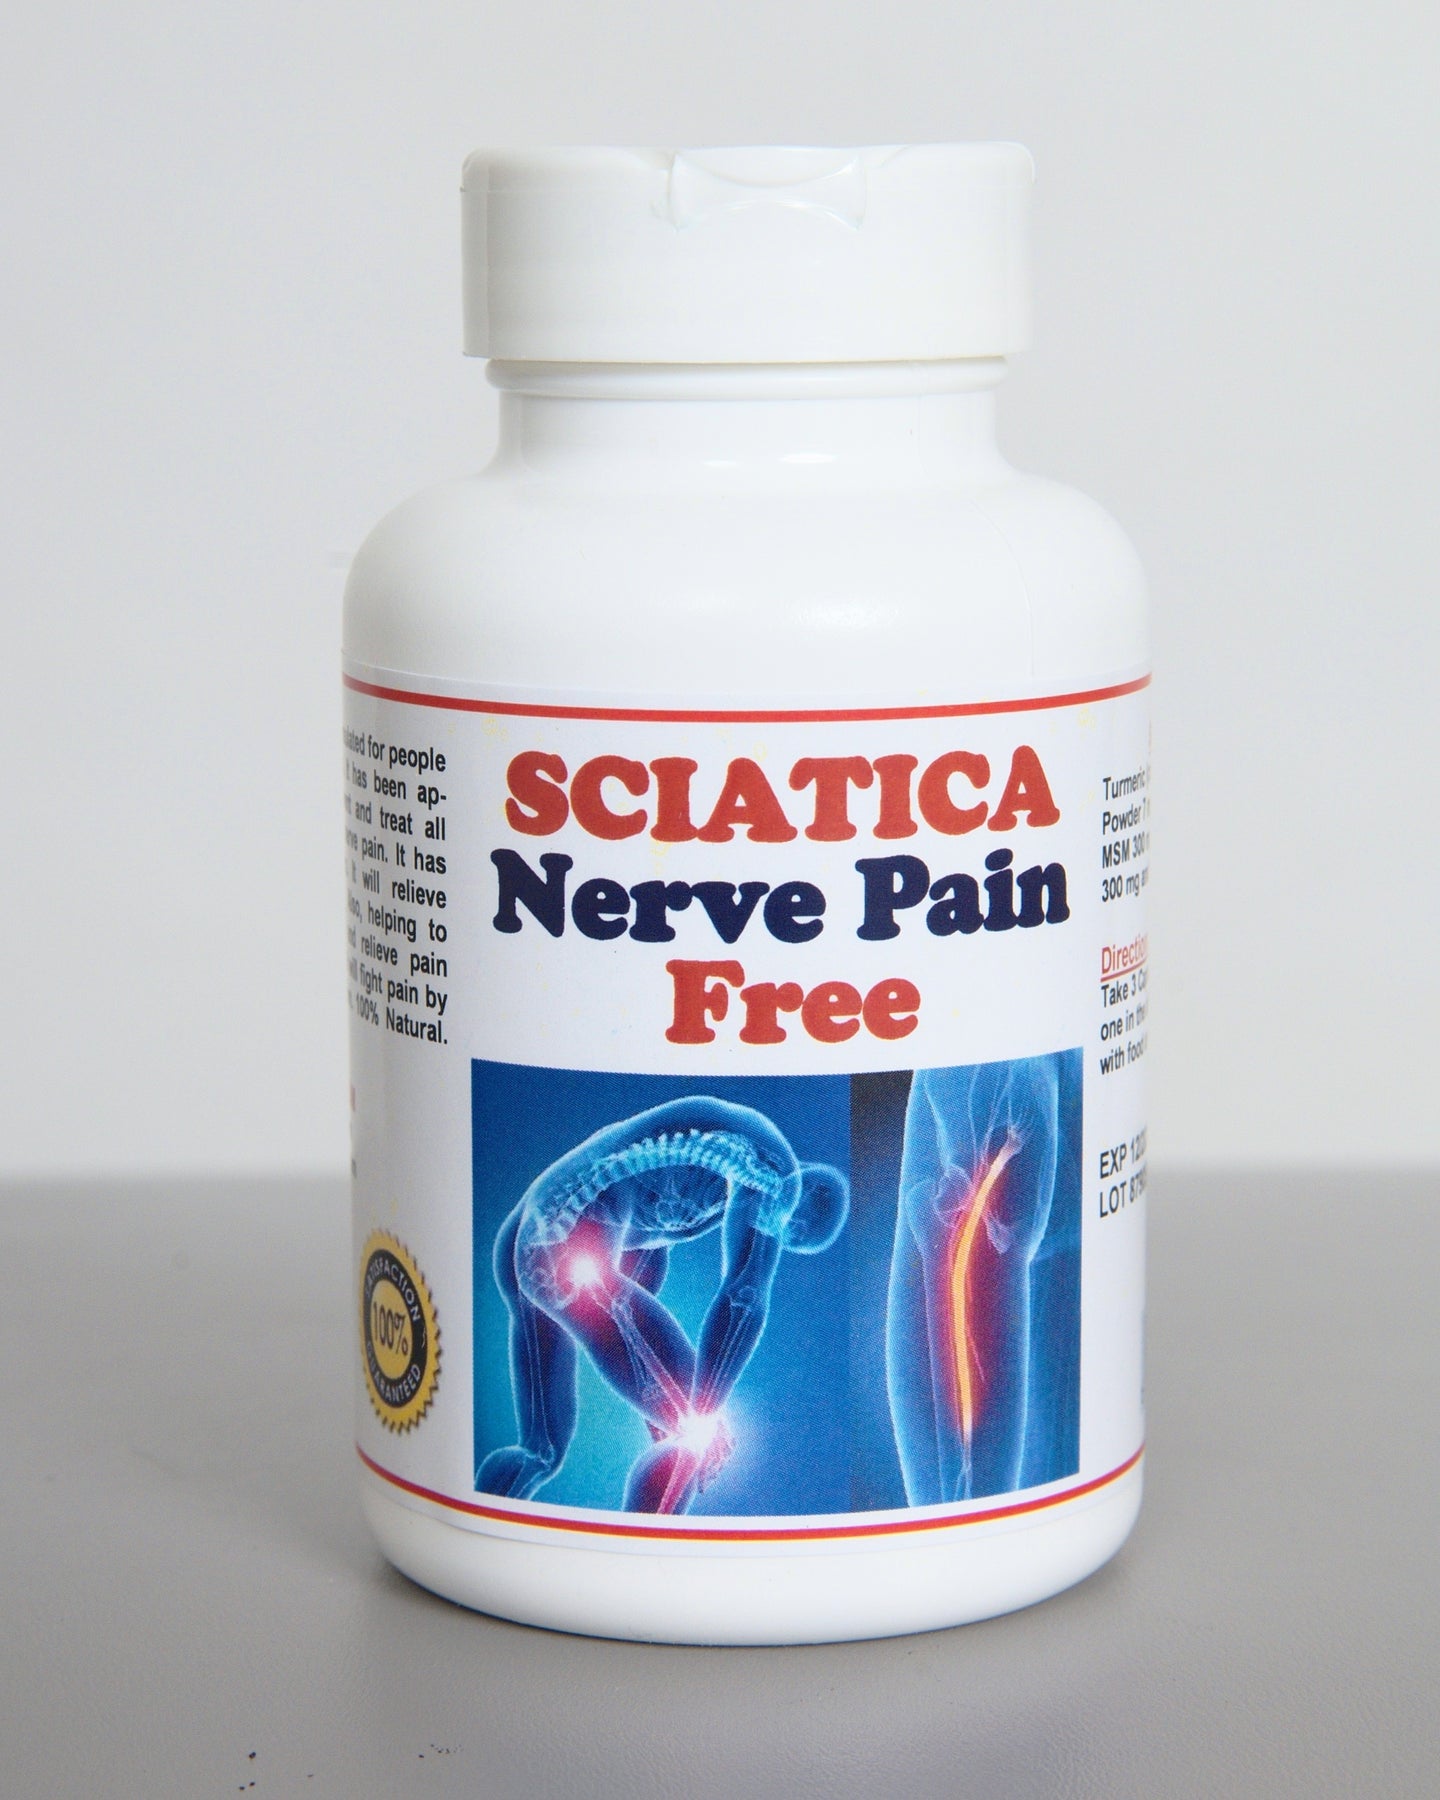 Bestmade Natural Products Sciatica Pain Relief for Nerve, Natural Supplement for Lower Backache (bm203)